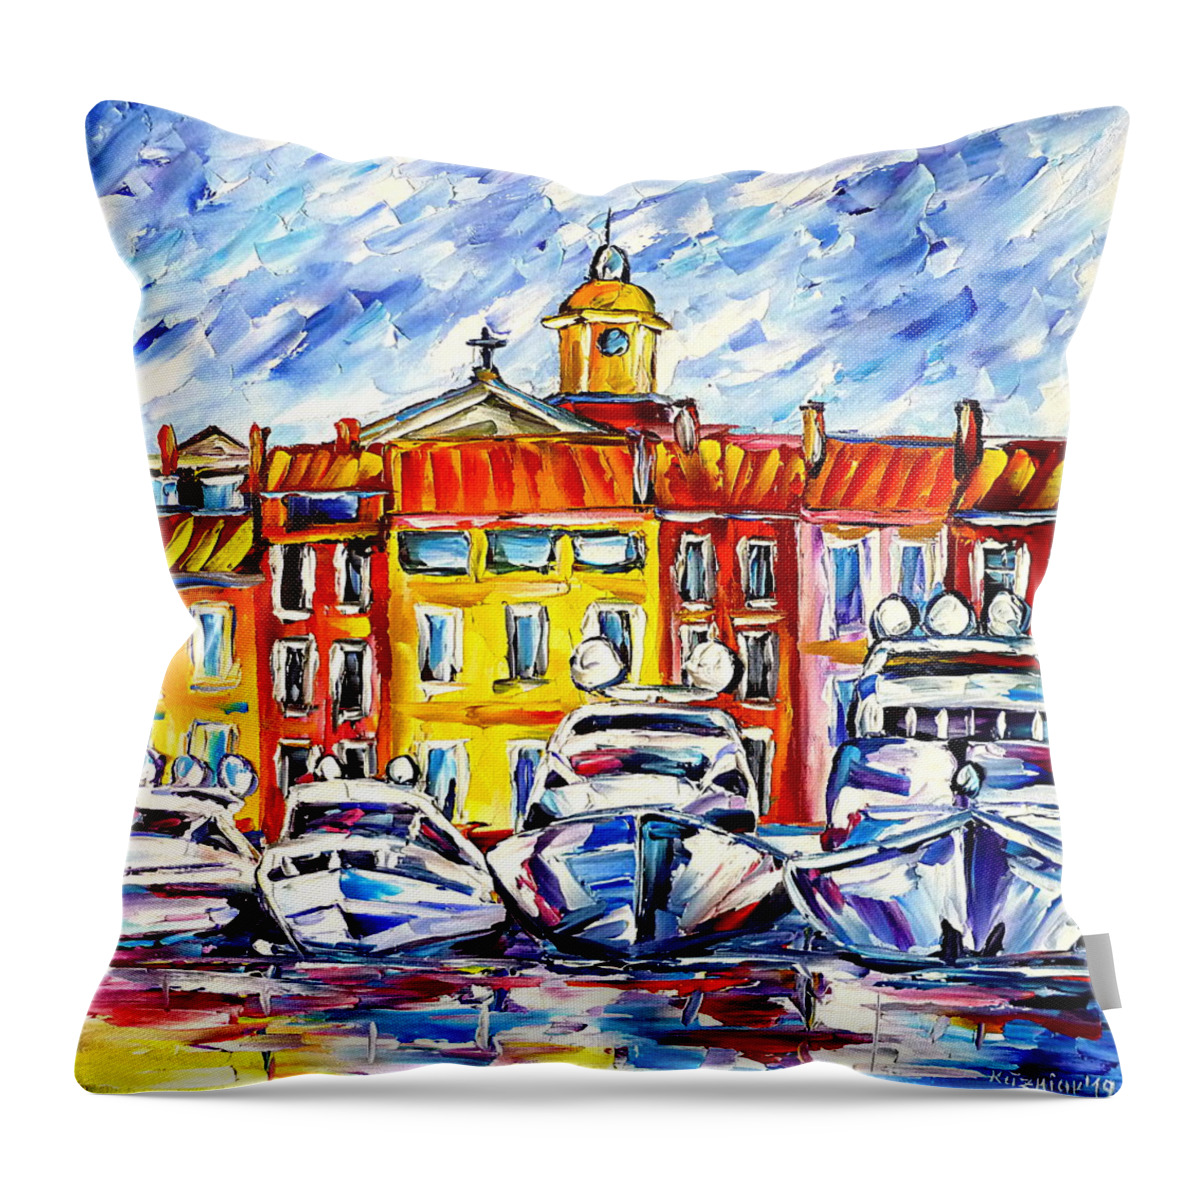 I Love St Tropez Throw Pillow featuring the painting Boats Of St. Tropez by Mirek Kuzniar